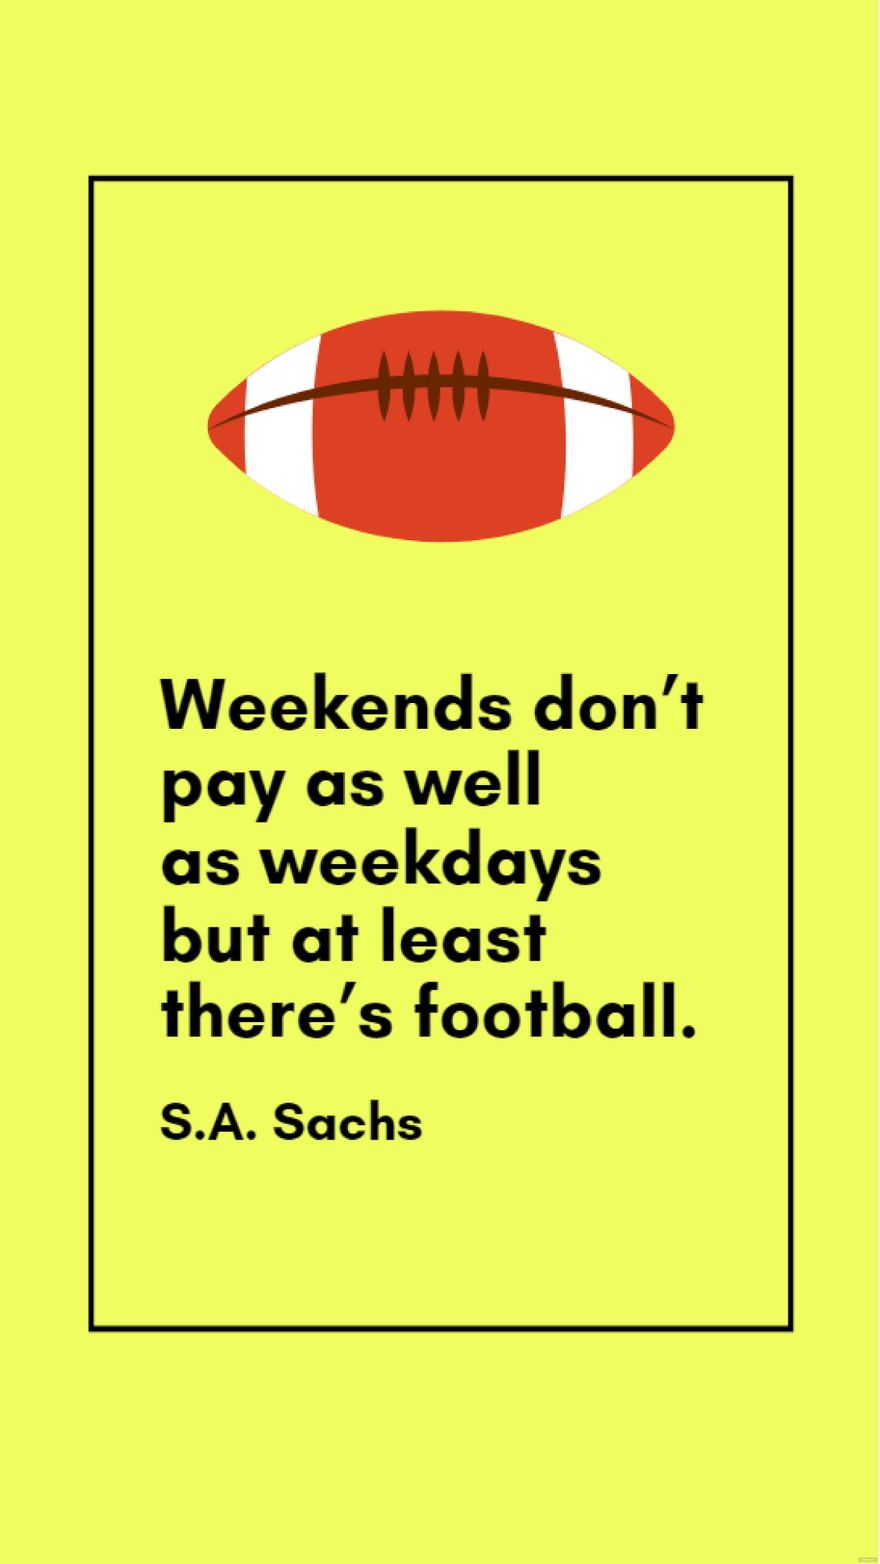 Free S.A. Sachs - Weekends don’t pay as well as weekdays but at least there’s football. 